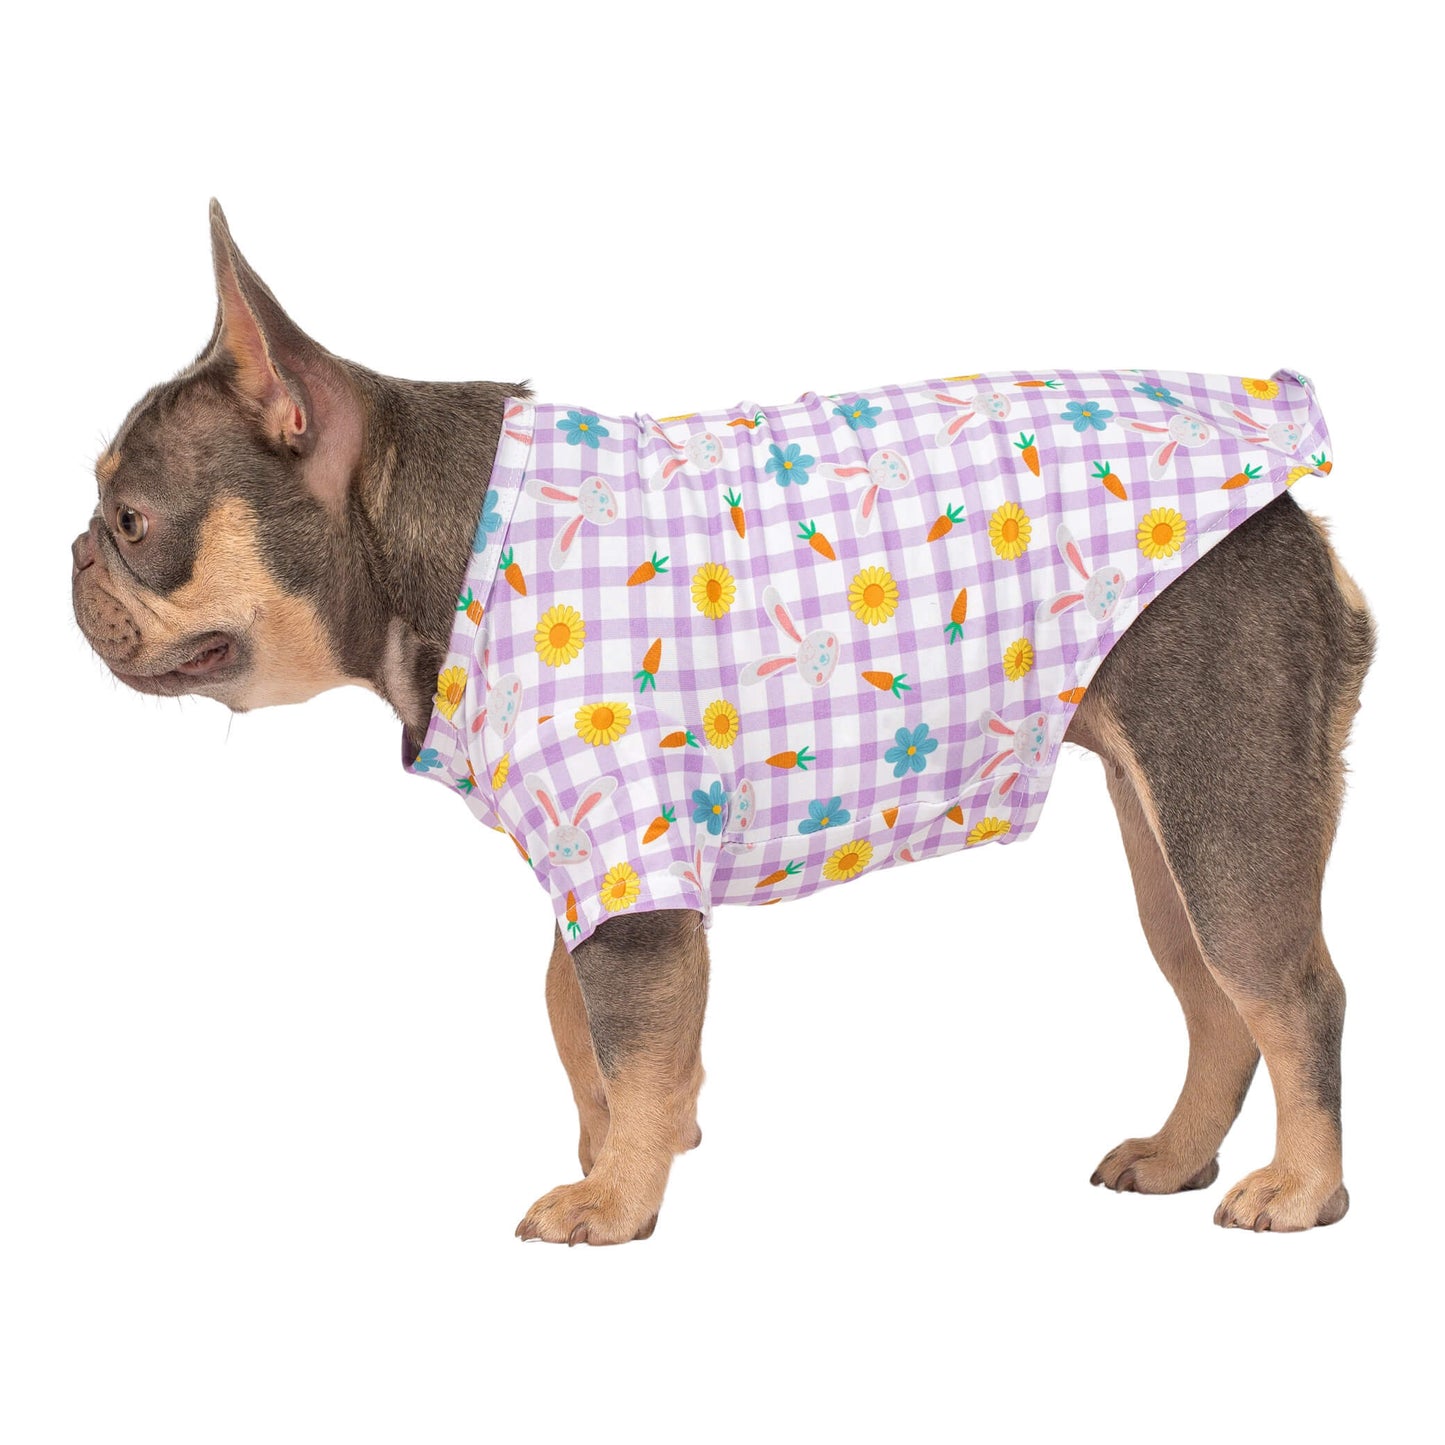 A Lilac tan French Bulldog standing side on. The French Bulldog is wearing a purple gingham dog shirt with bunnies and sun flowers print.